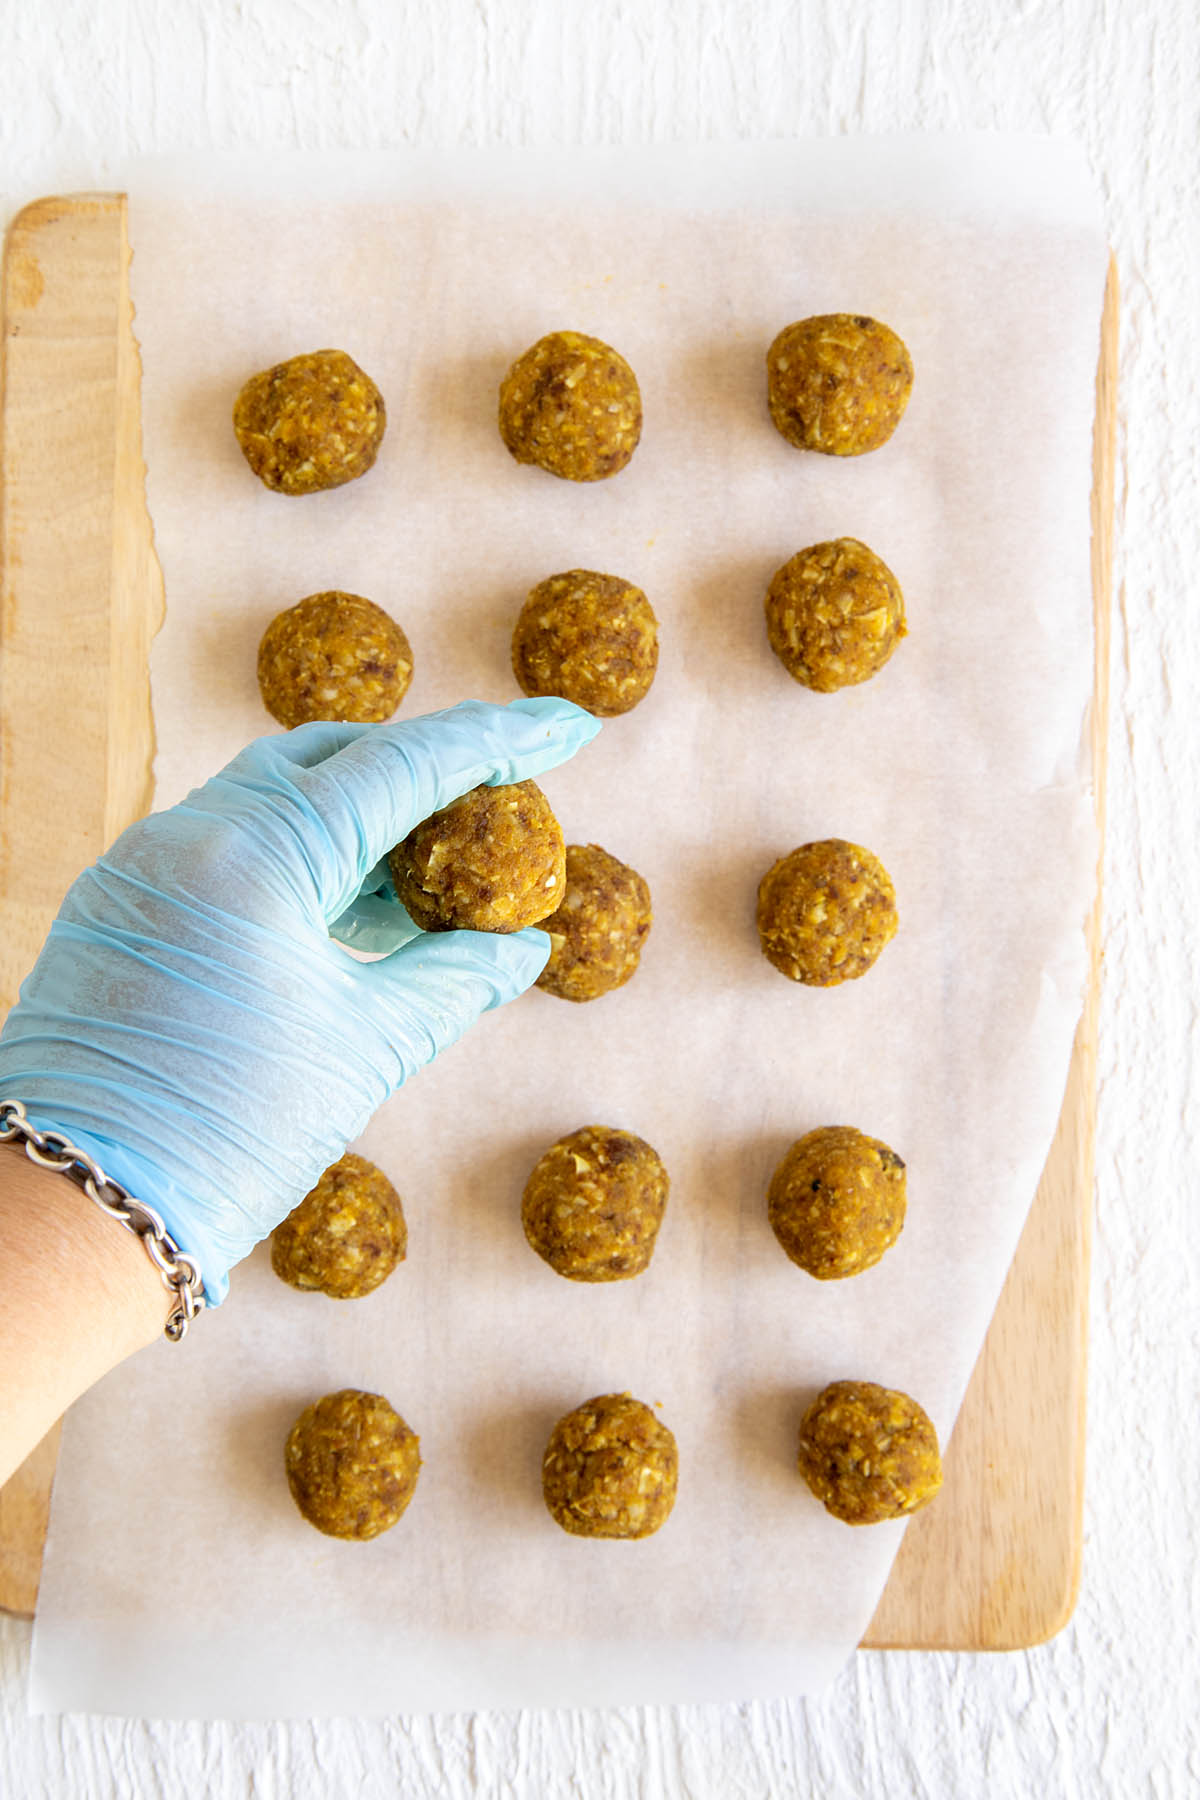 Turmeric balls on parchment paper and one in a gloved hand.